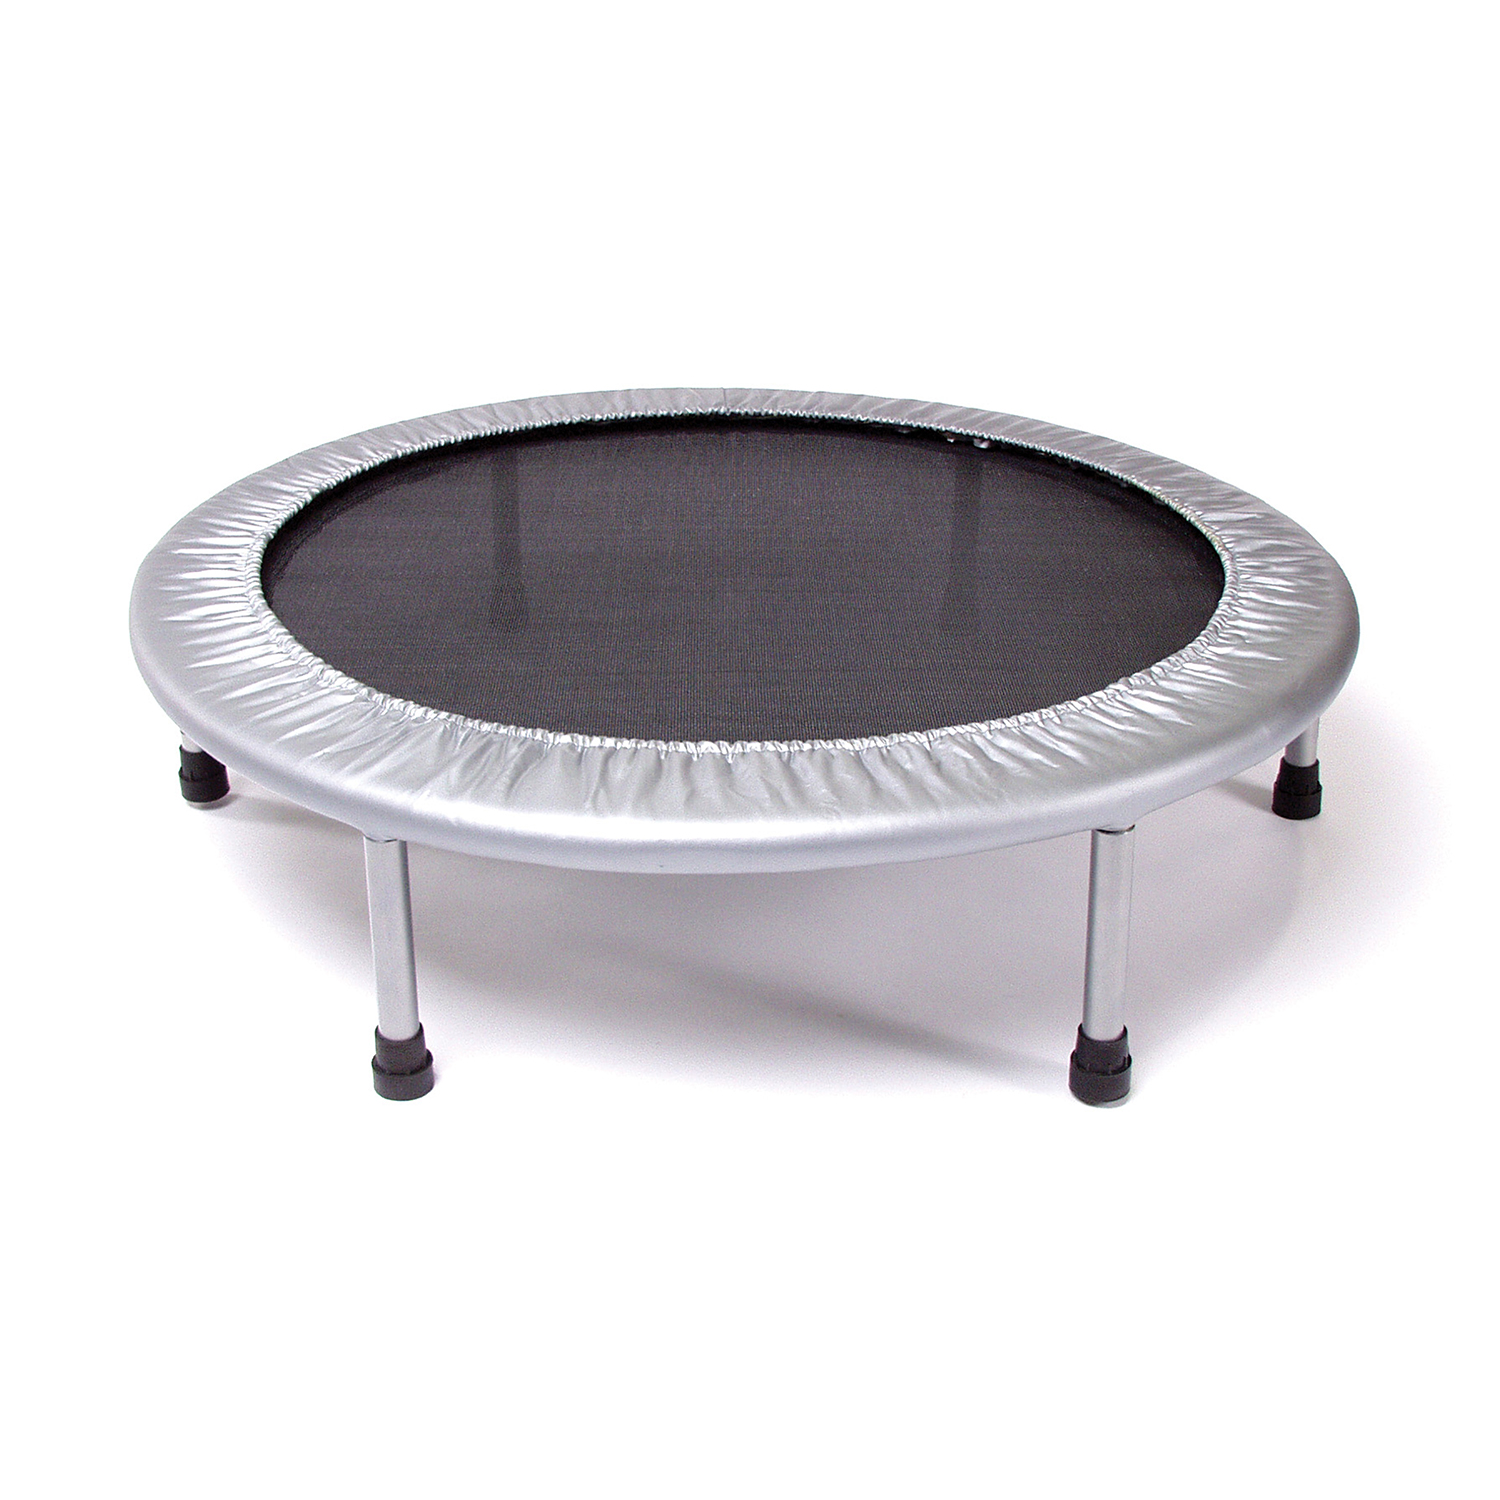 Stamina 36 in. Folding Trampoline, Gray - Low Impact - Easy to Use - image 1 of 5